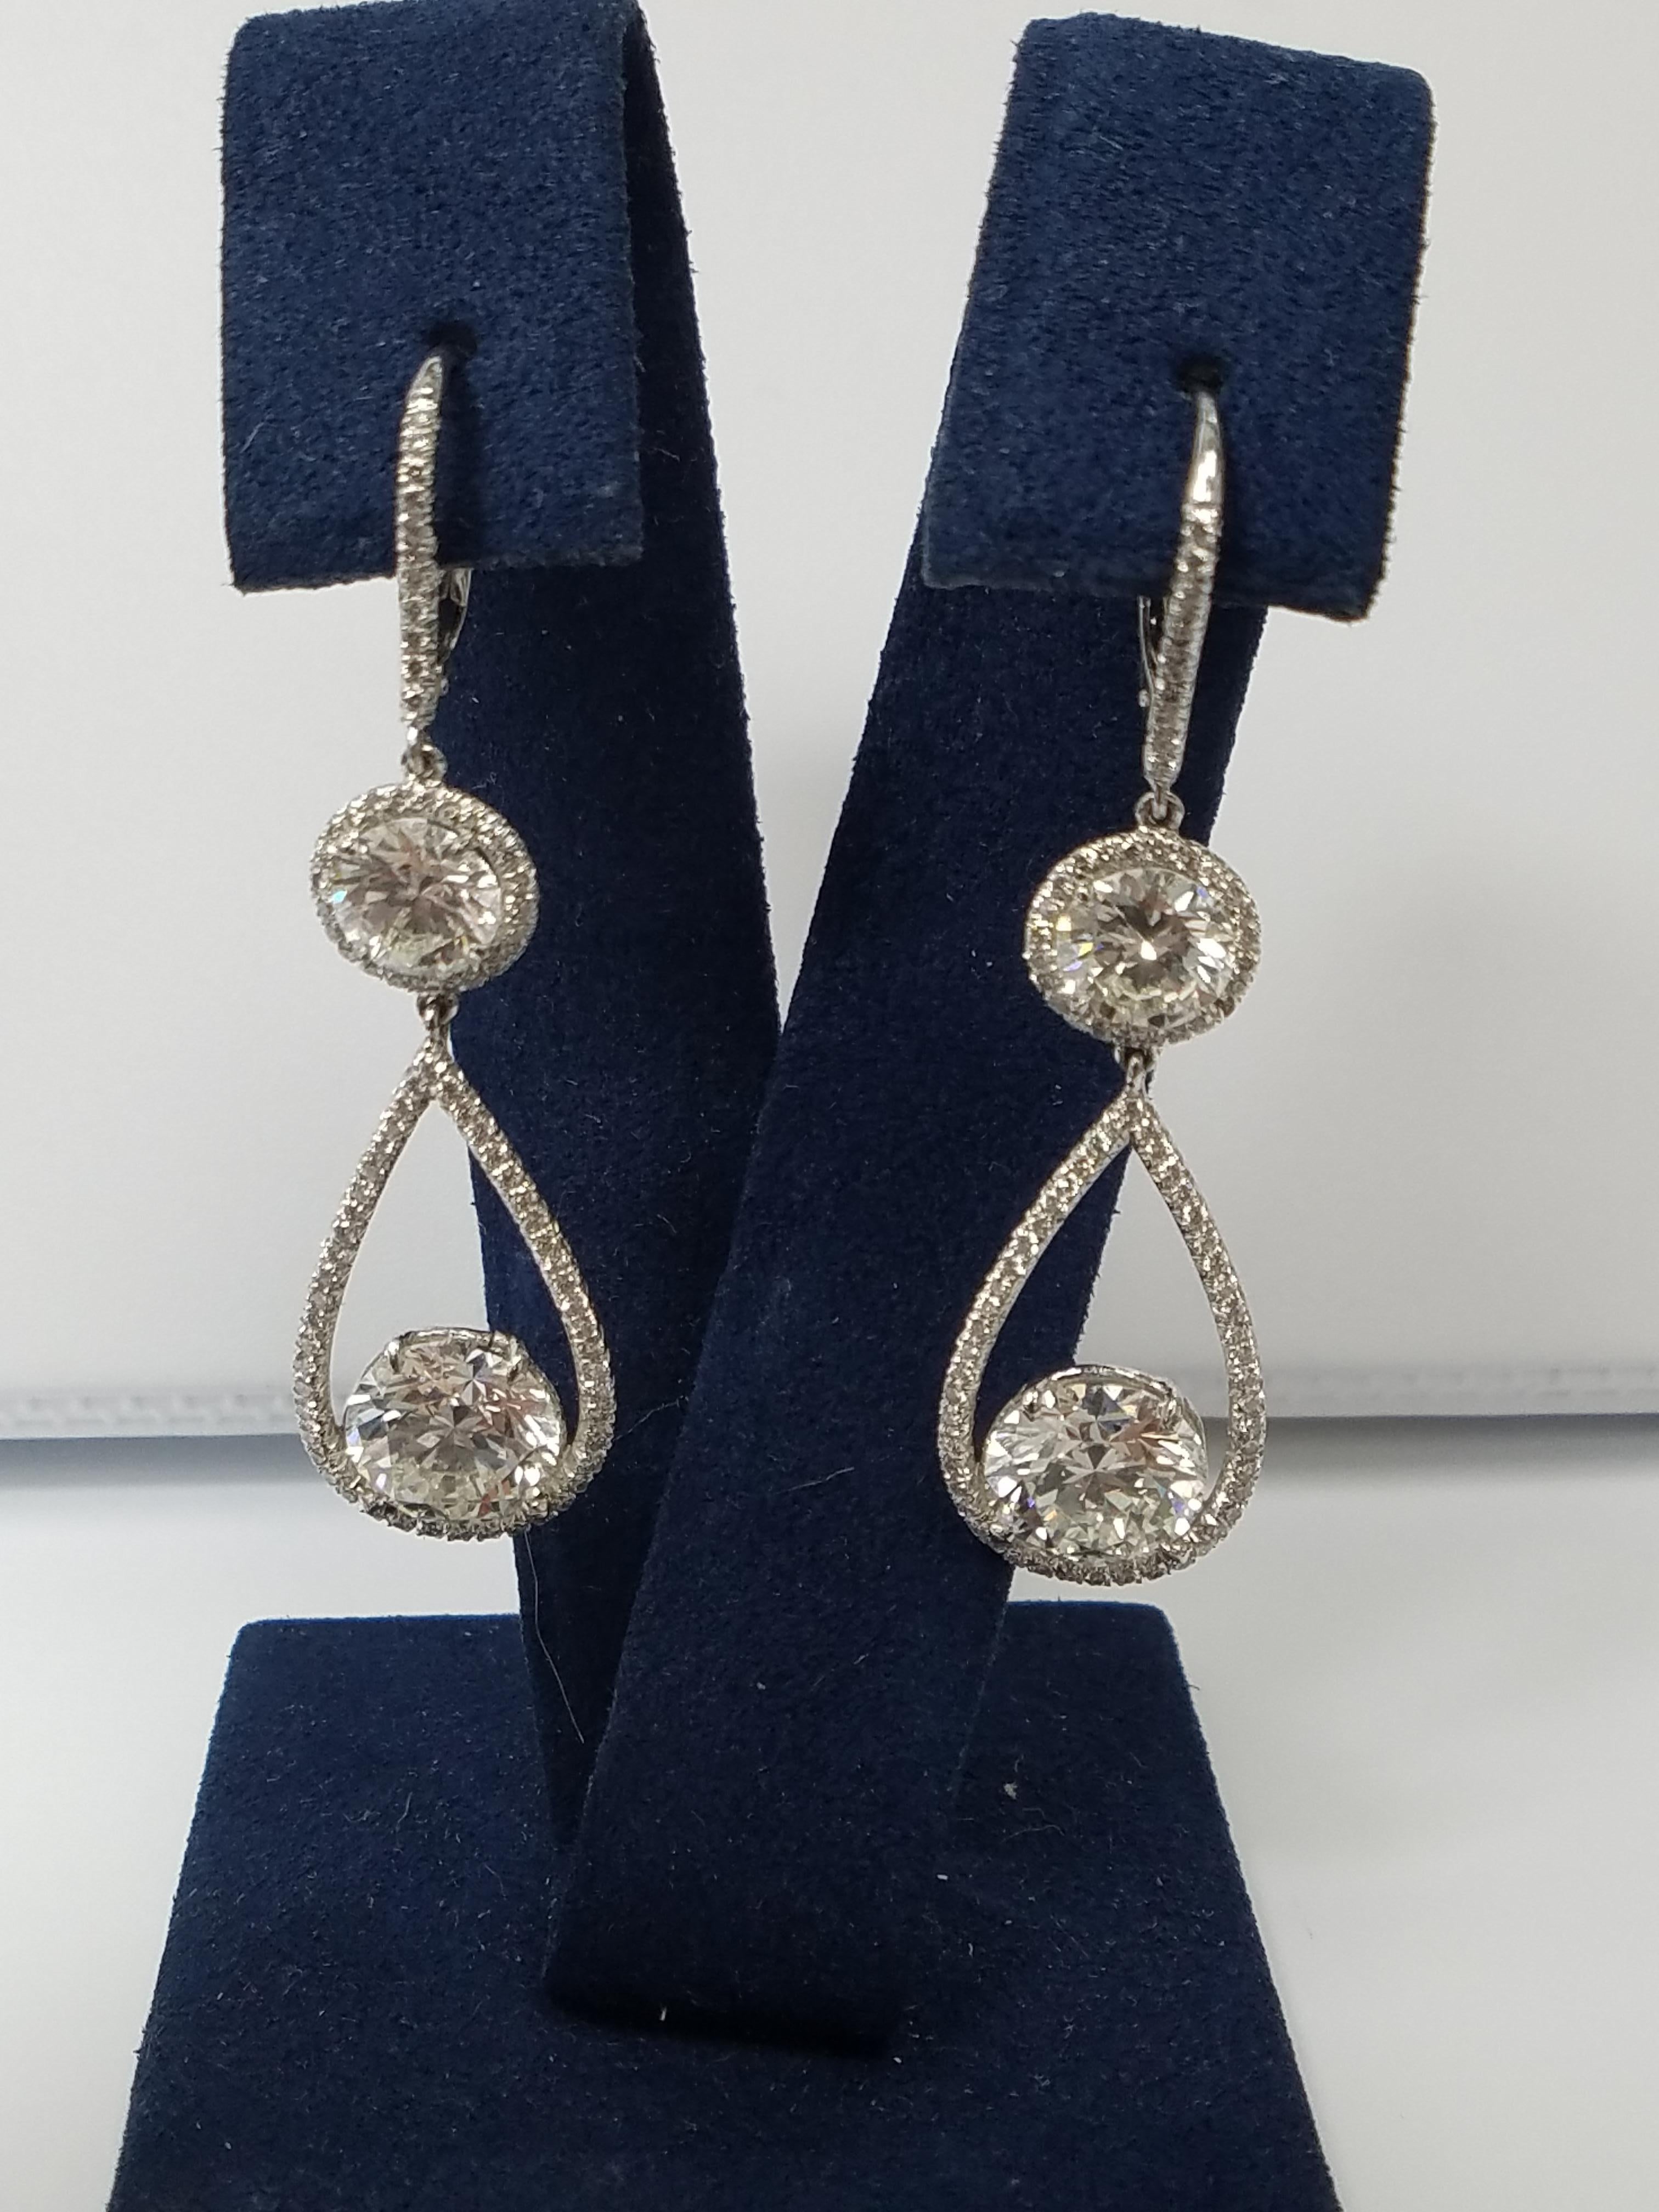 GIA Certified 9.19 total carat weight Diamond earrings.

Top stones are matching 1 carat each each GIA certified and bottom bigger stones are 3 carat each also GIA certified. Has an additional 1 carat of diamonds set in the platinum setting. All the